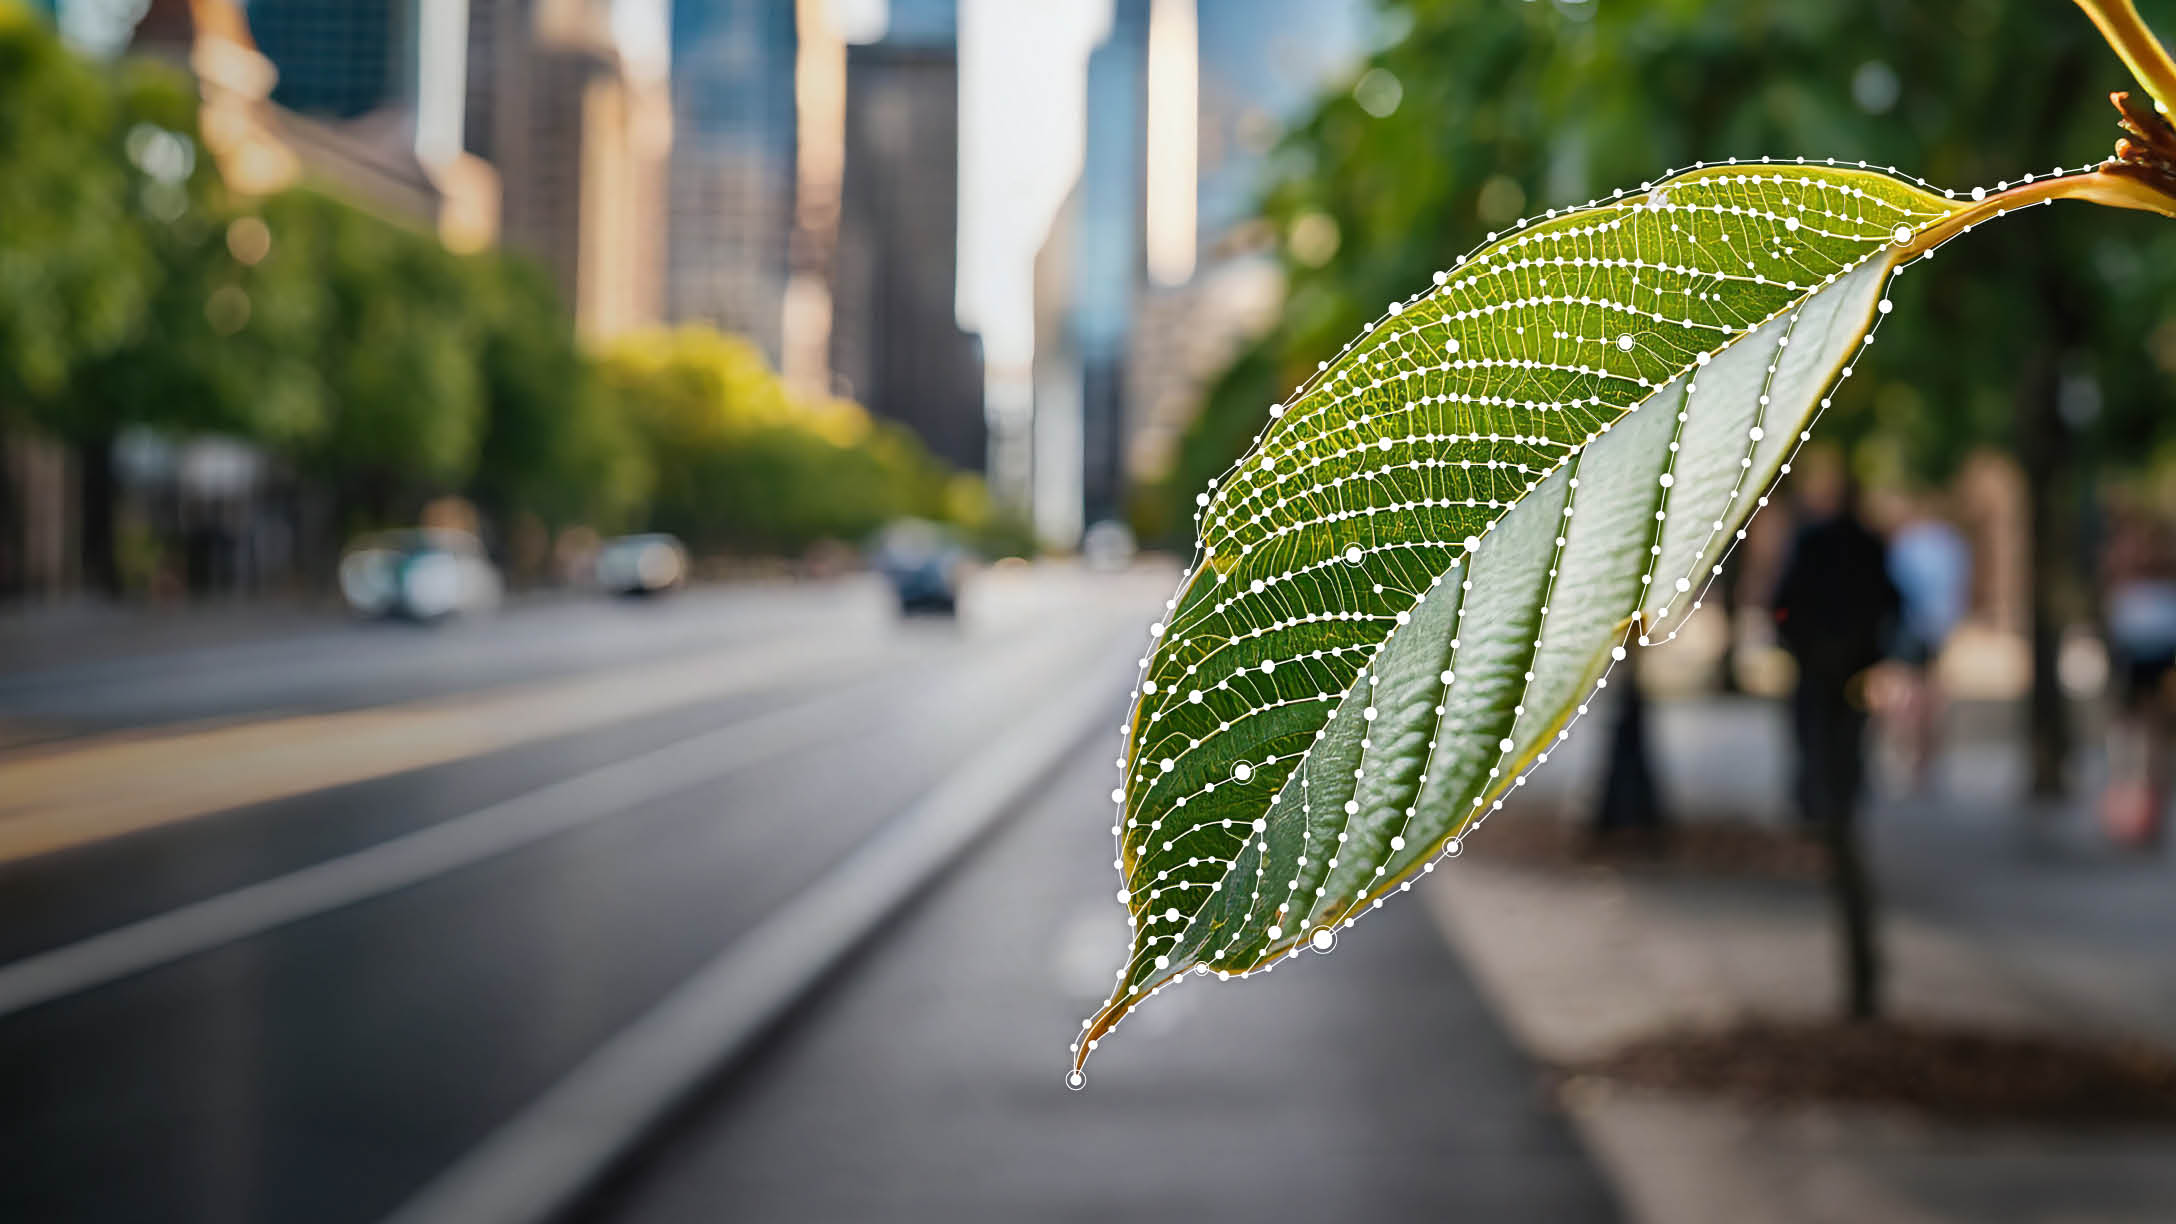 Photo of a leaf in the foreground, with a paved road in the background